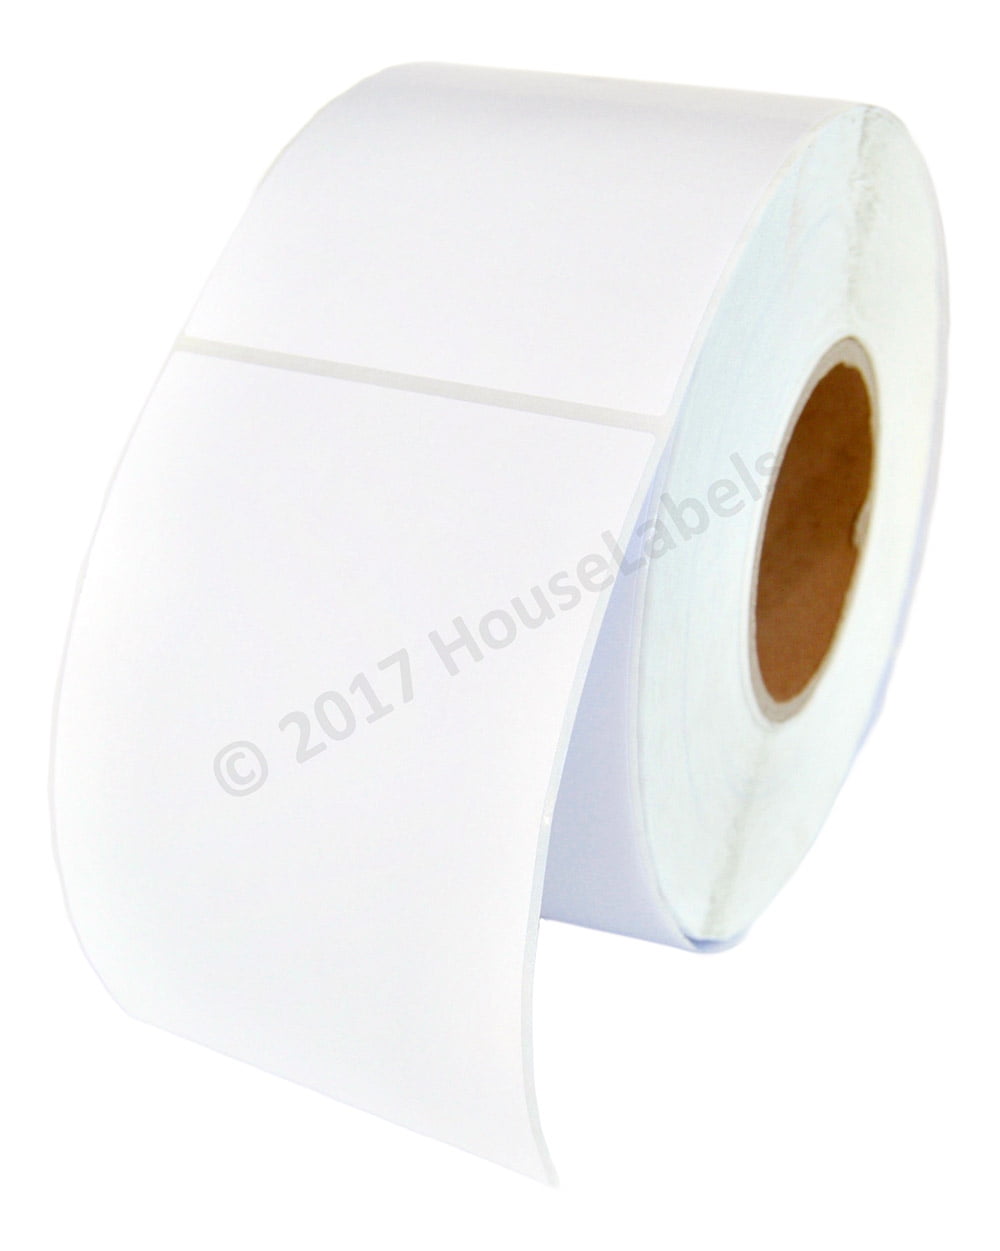 2 Rolls 250 Labels 4x6 4" x 6" Direct Thermal Zebra Eltron Shipping Labels 4 x 6 